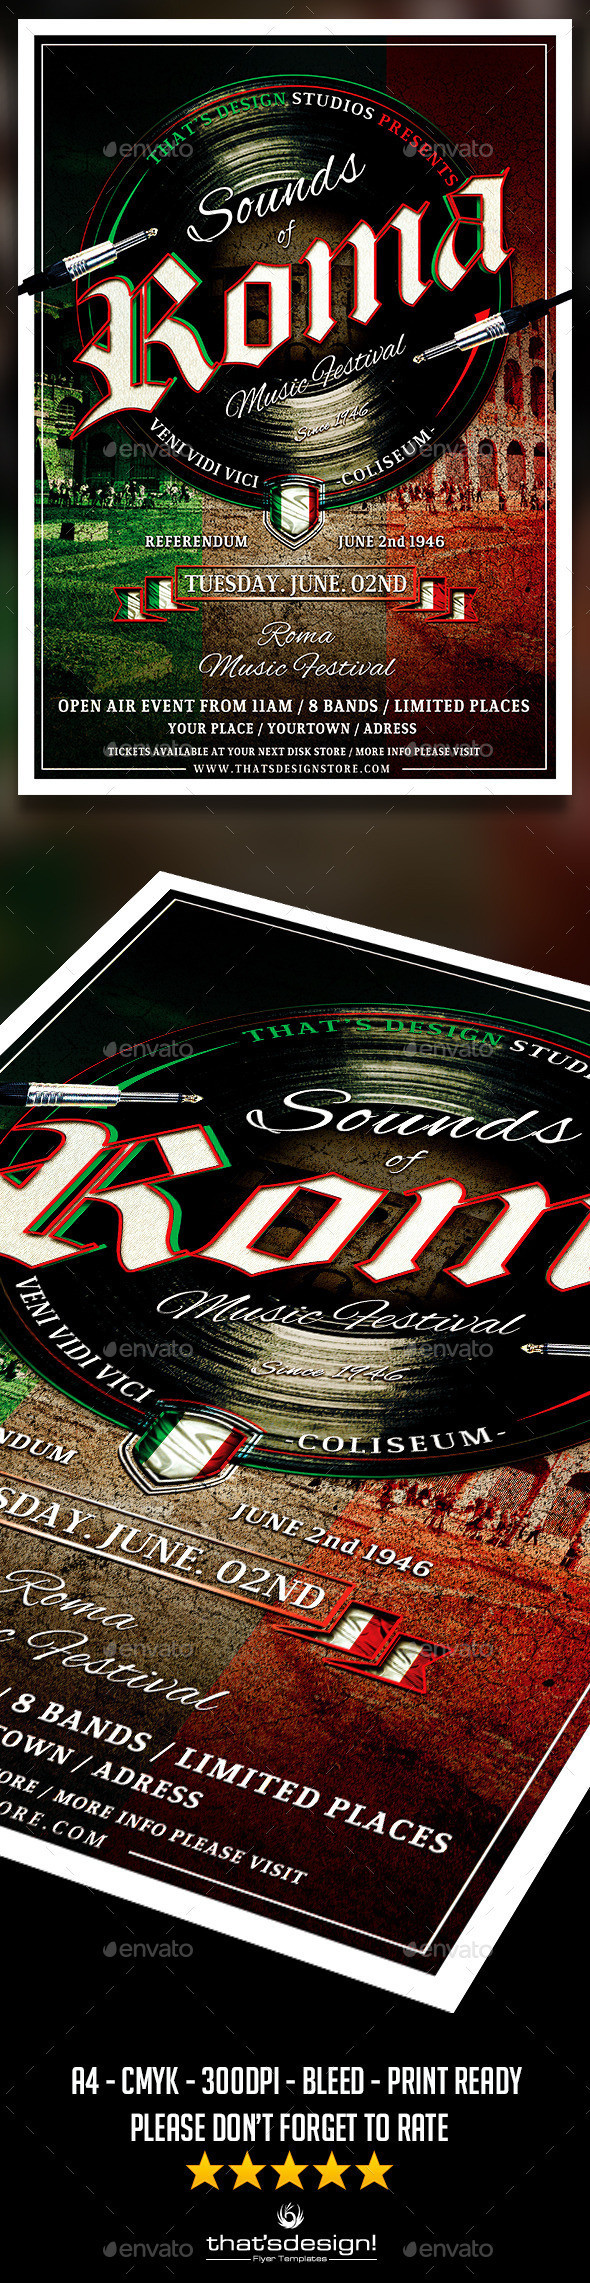 Ip 20sounds 20of 20roma 20flyer 20poster 20template